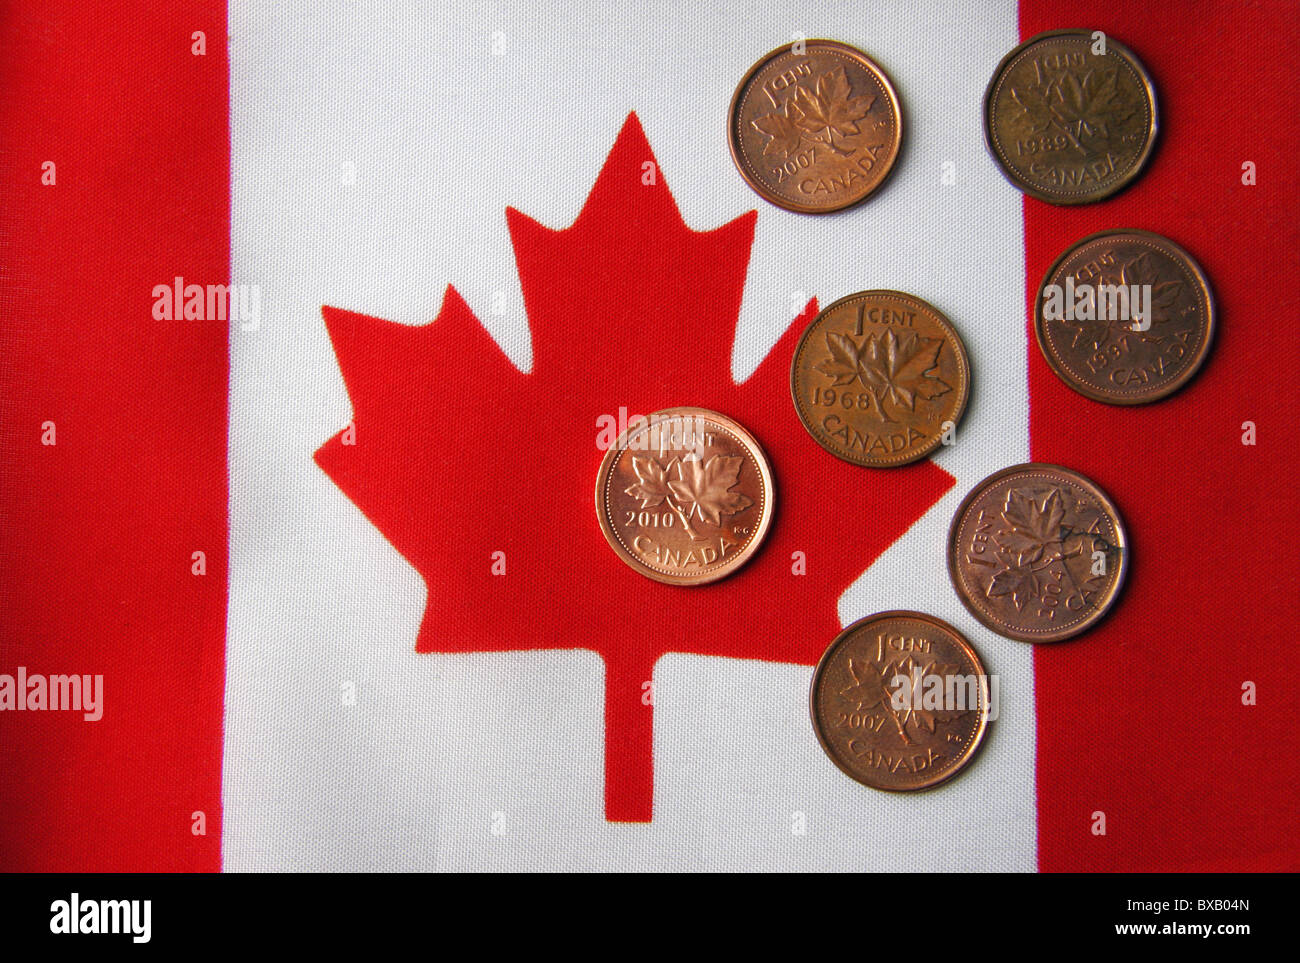 In Canada the Senate finance committee is considering scrapping the Canadian one cent penny coin. Stock Photo